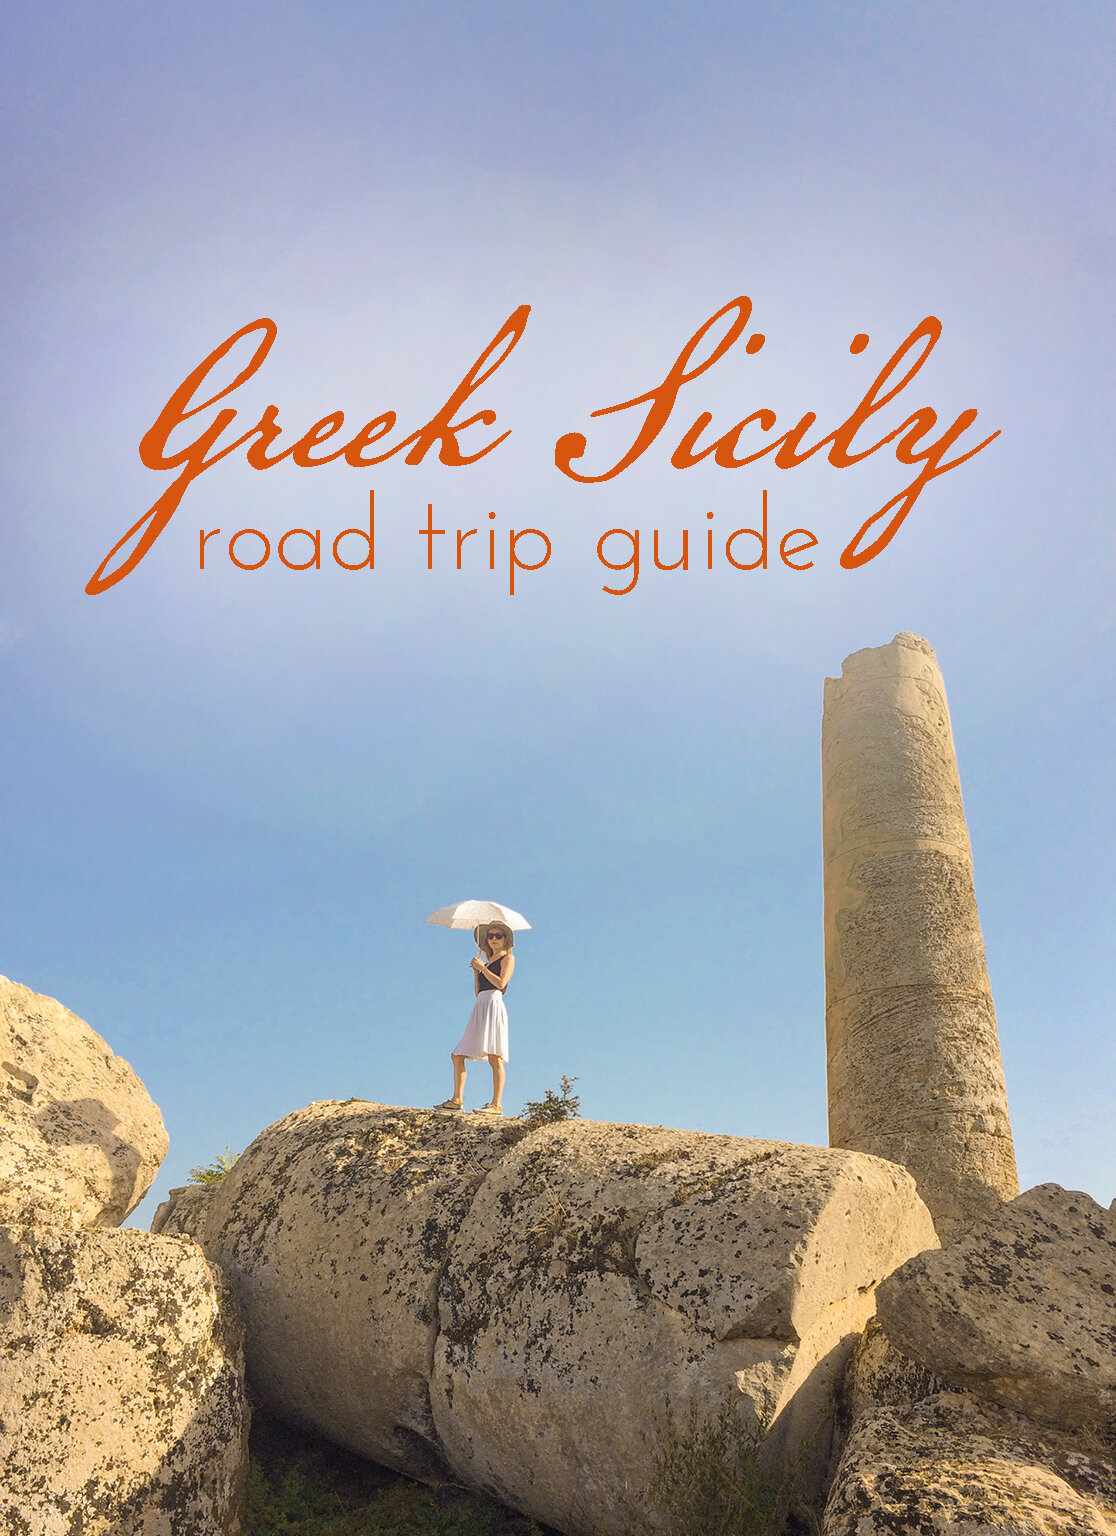 covid-friendly-slow-travel-road-trip-guide-sicily